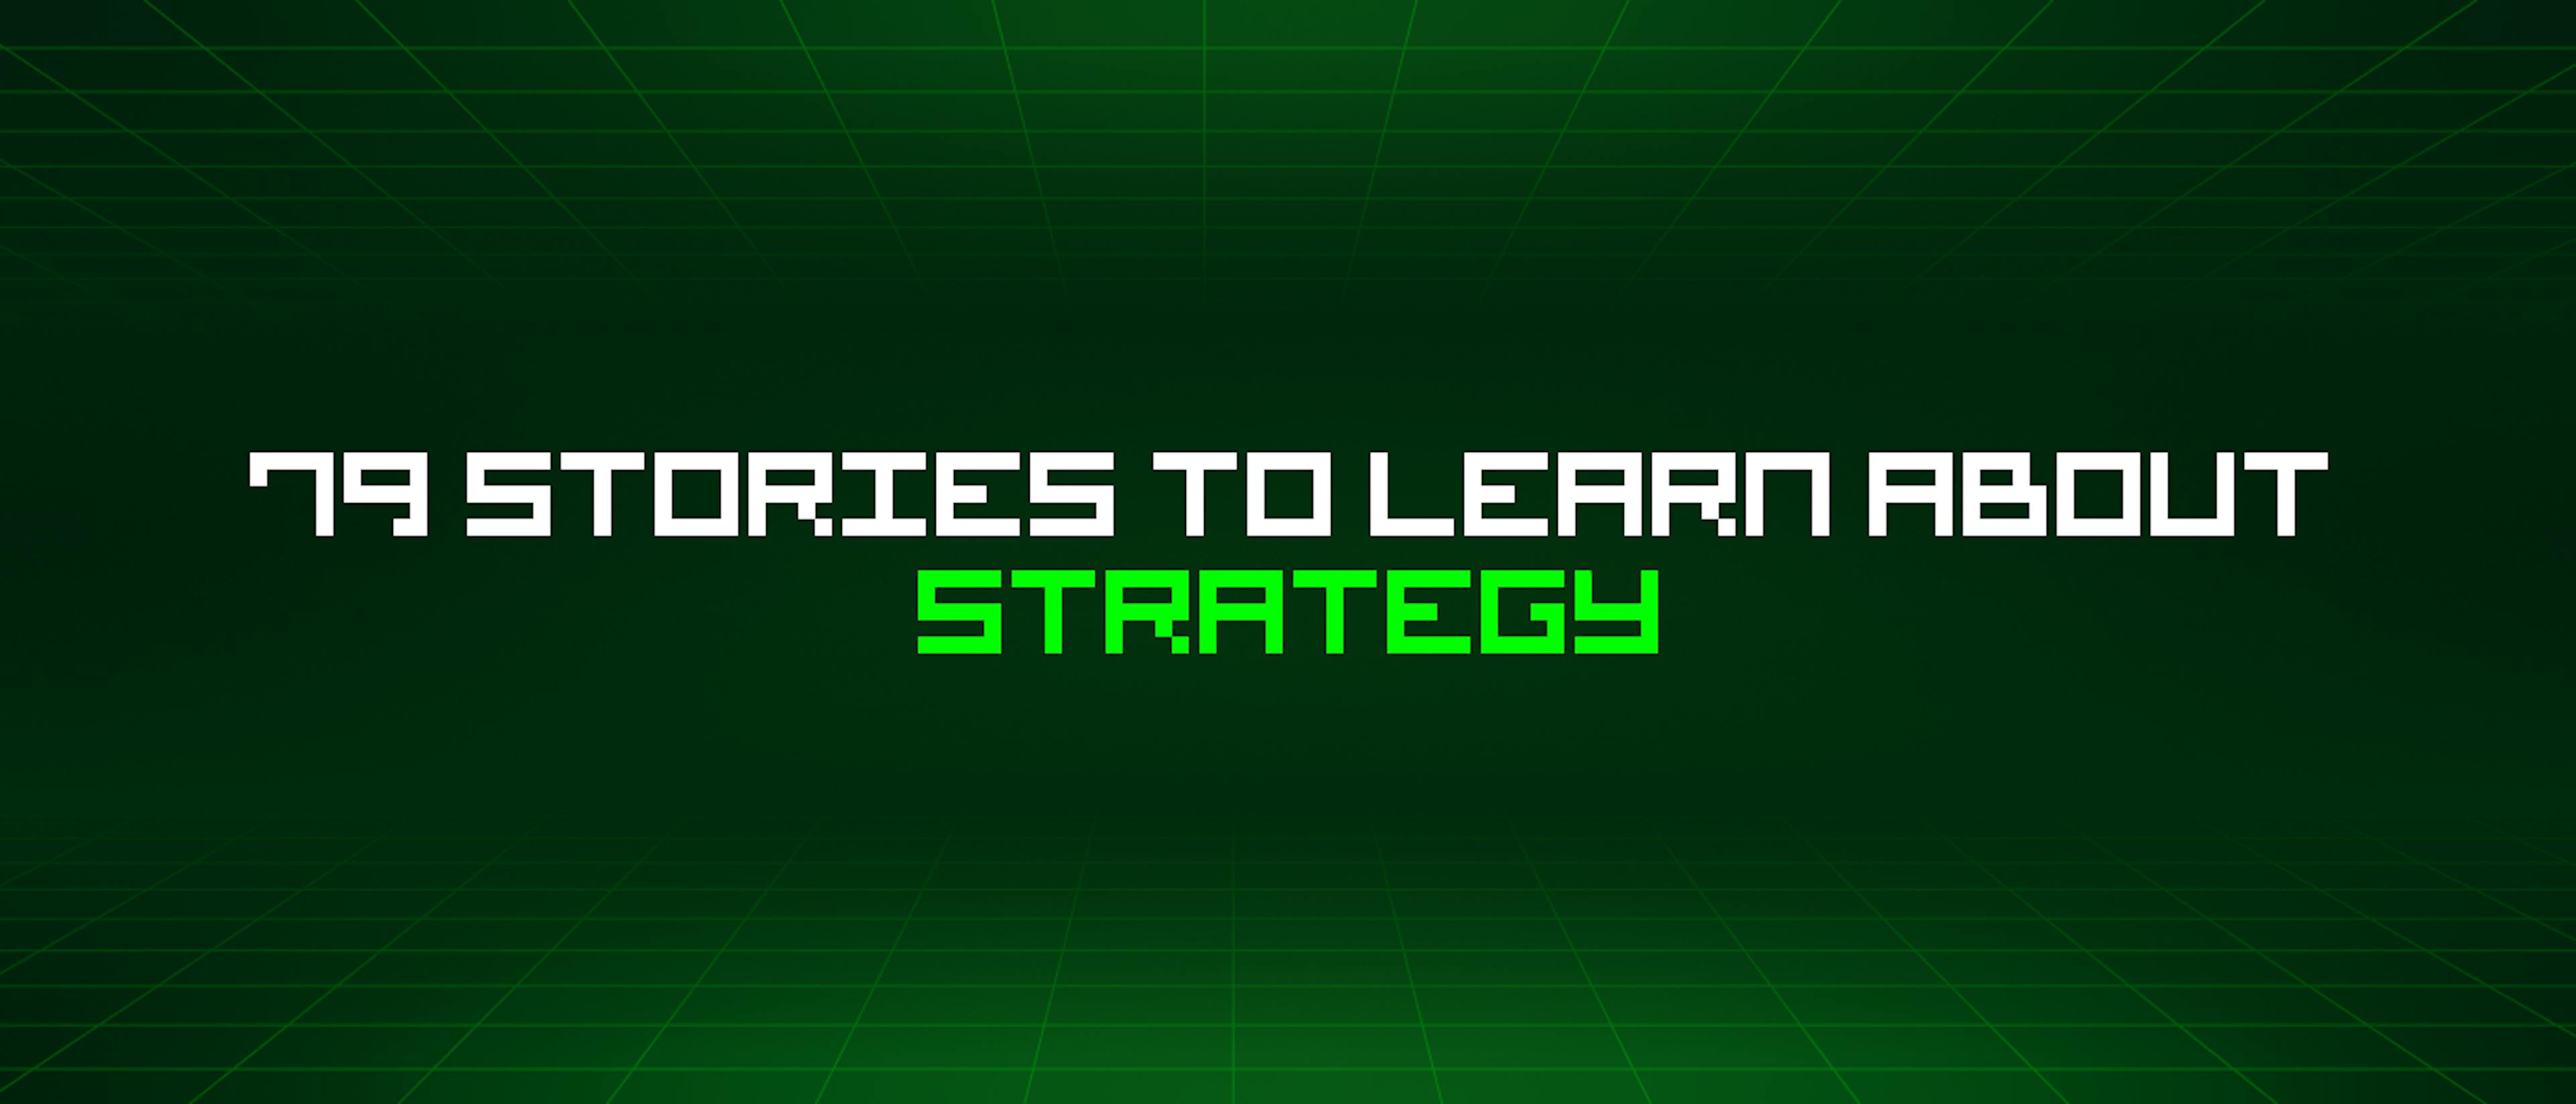 featured image - 79 Stories To Learn About Strategy